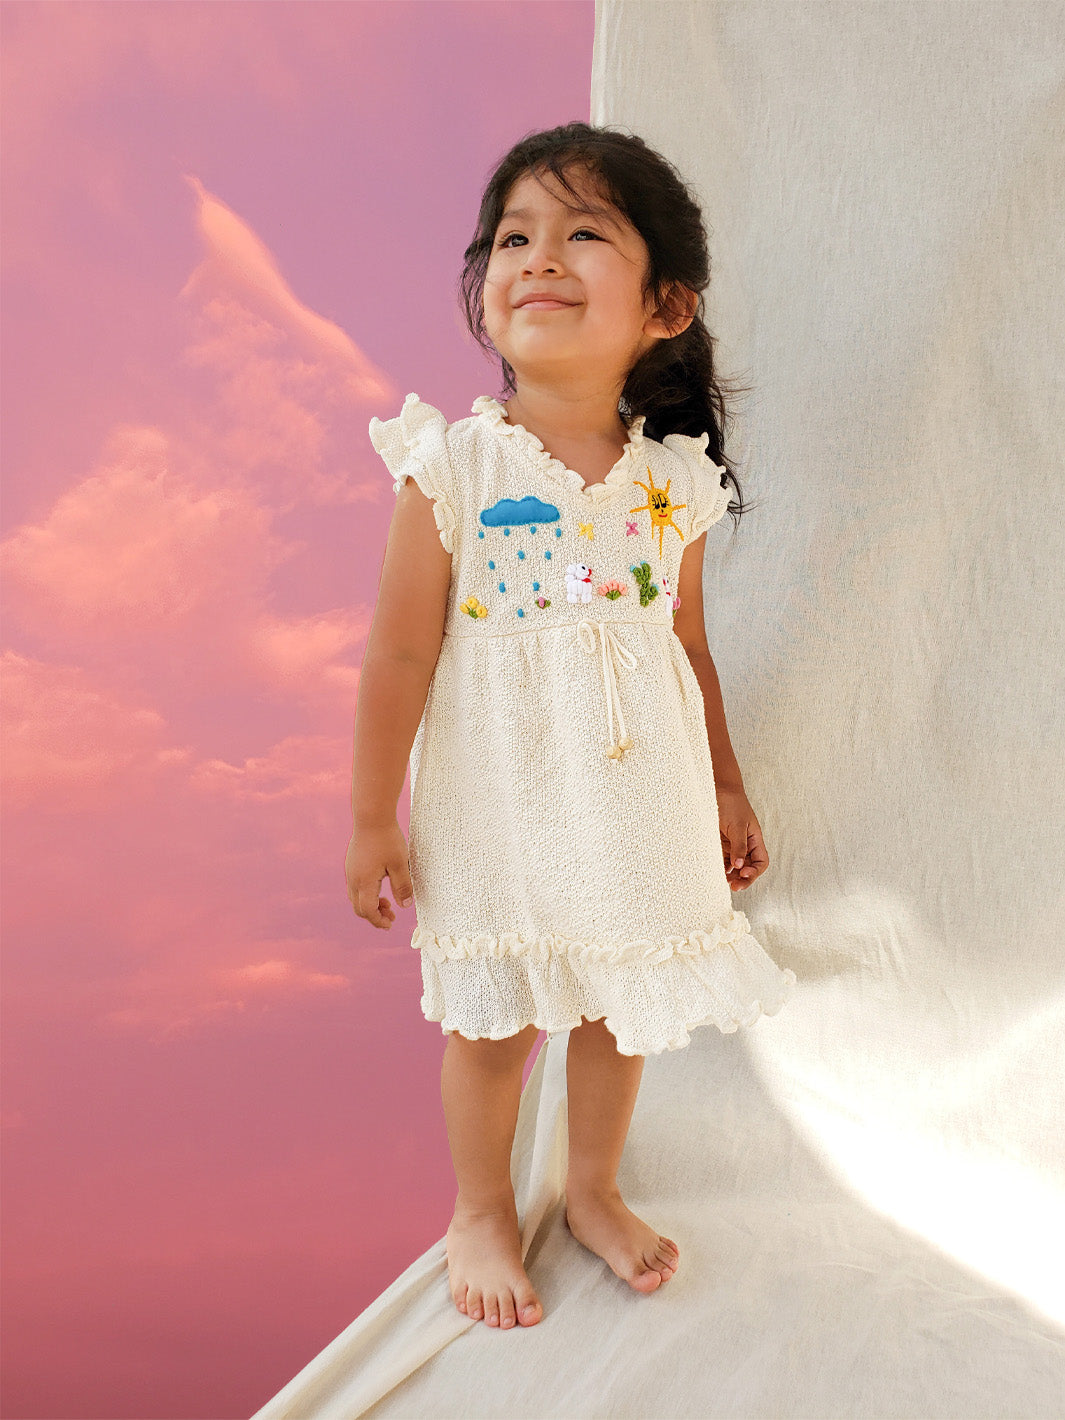 Liten Aventuris Collections. A dream fit for your little girl! Our Tanya Dress has an A-line fit and fun double-layer butterfly sleeves perfect for twirling and dancing. Made of knitted cotton fabric with hand embroidery inspired by nature. Embroidered by Peruvian artisans, this dress brings a touch of whimsy with its decorative fringe. Let your little one explore the world in style! Bomullsklänning för babis och flickor.